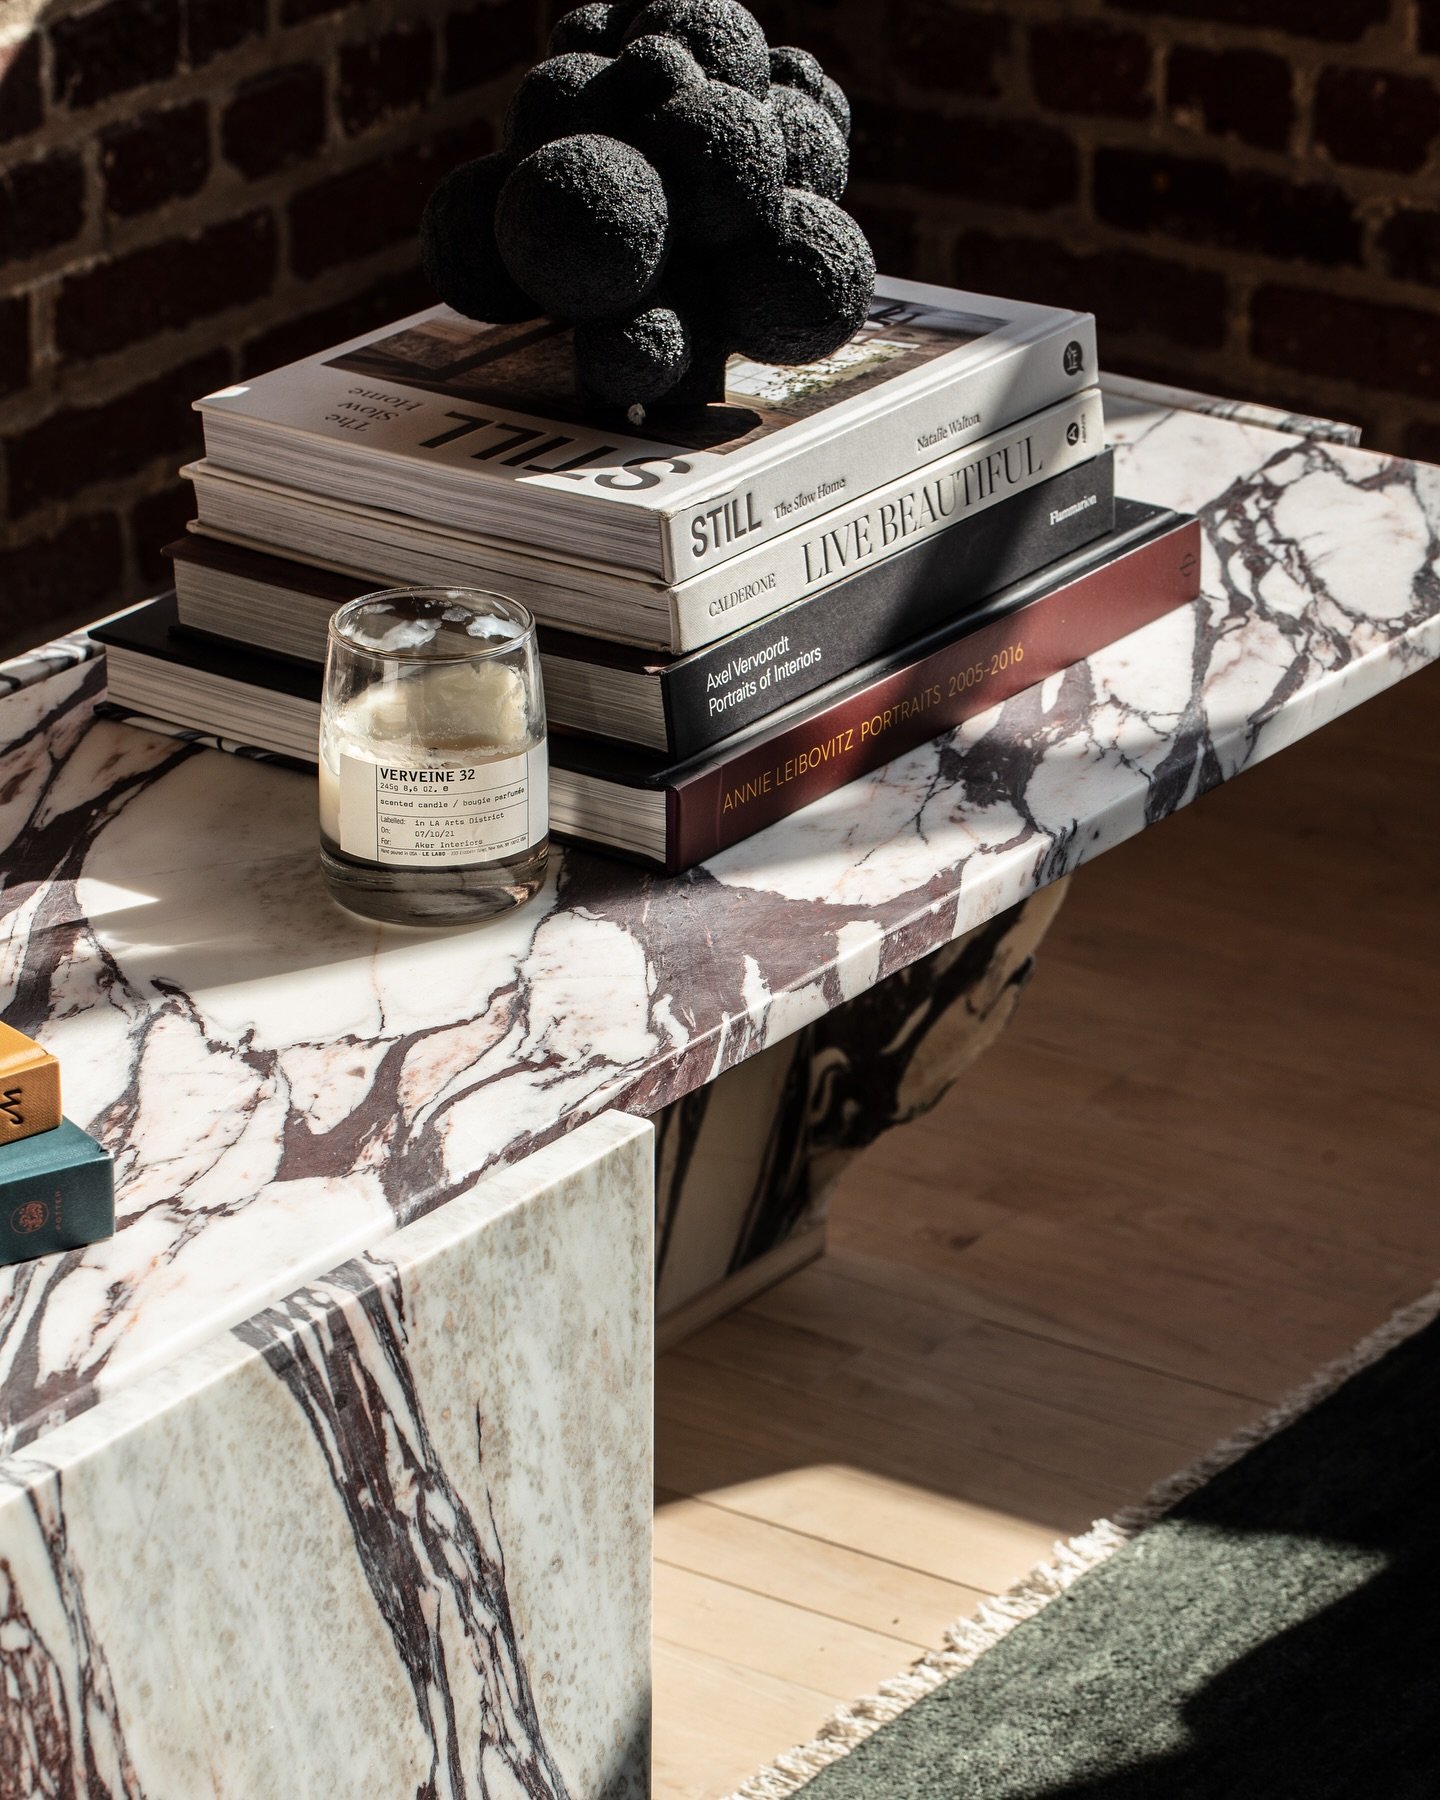 Who doesn&rsquo;t love the drama of Calacatta Viola?!

📸 @michaelcliffordphotography 
.
.
.
.
#marbletable #calacattaviola #marble #interiorstyling #showroomdesign #losangeles #stylingtips #styling